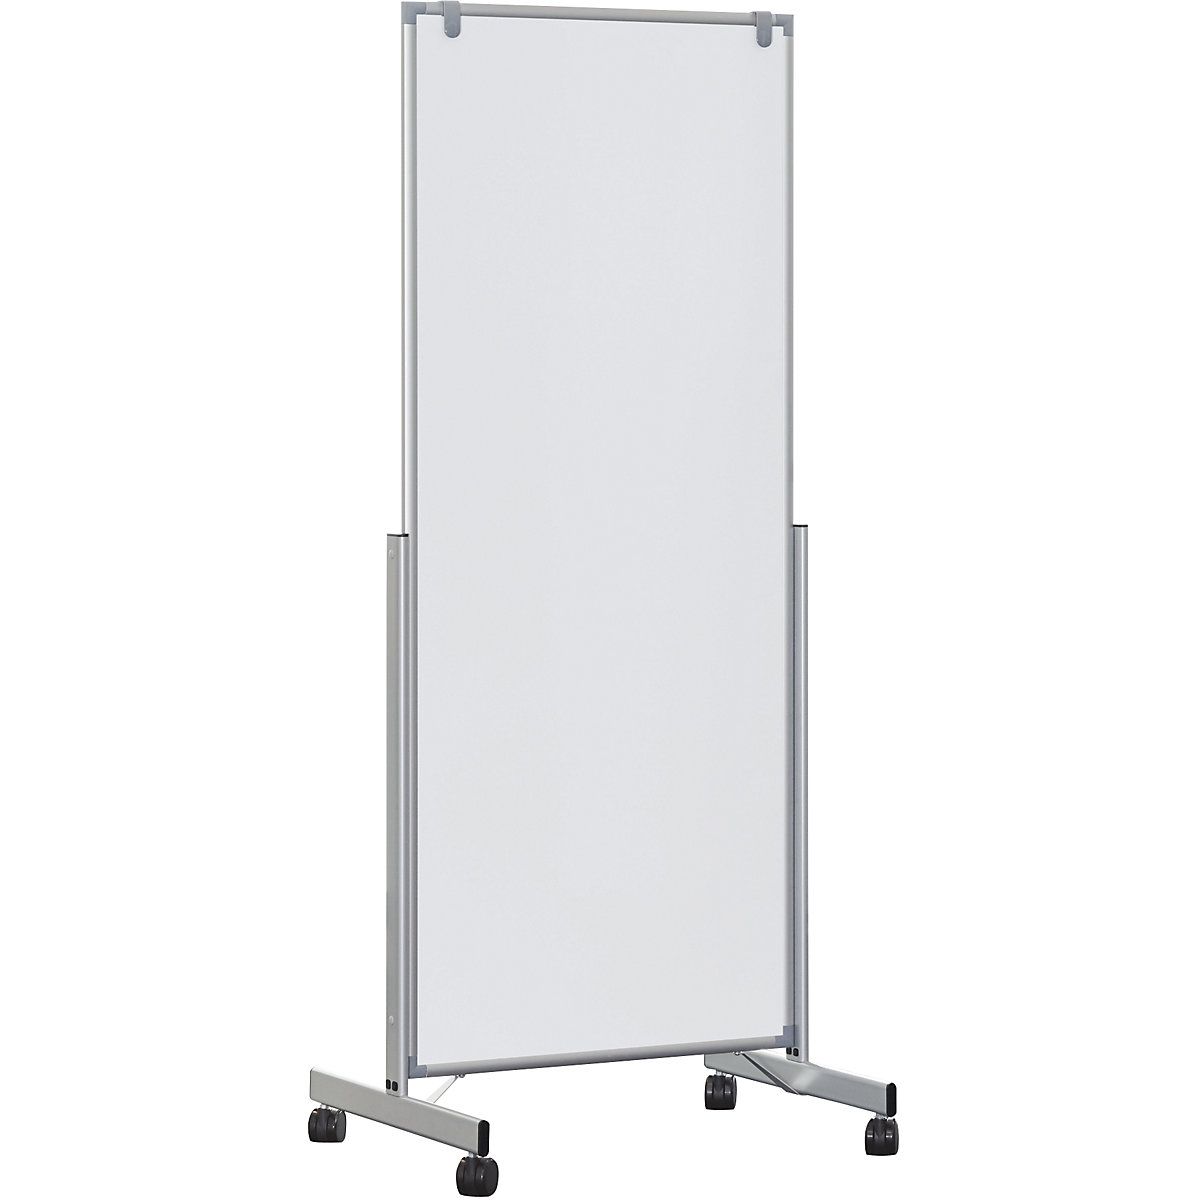 Whiteboard MAULpro easy2move, mobil MAUL